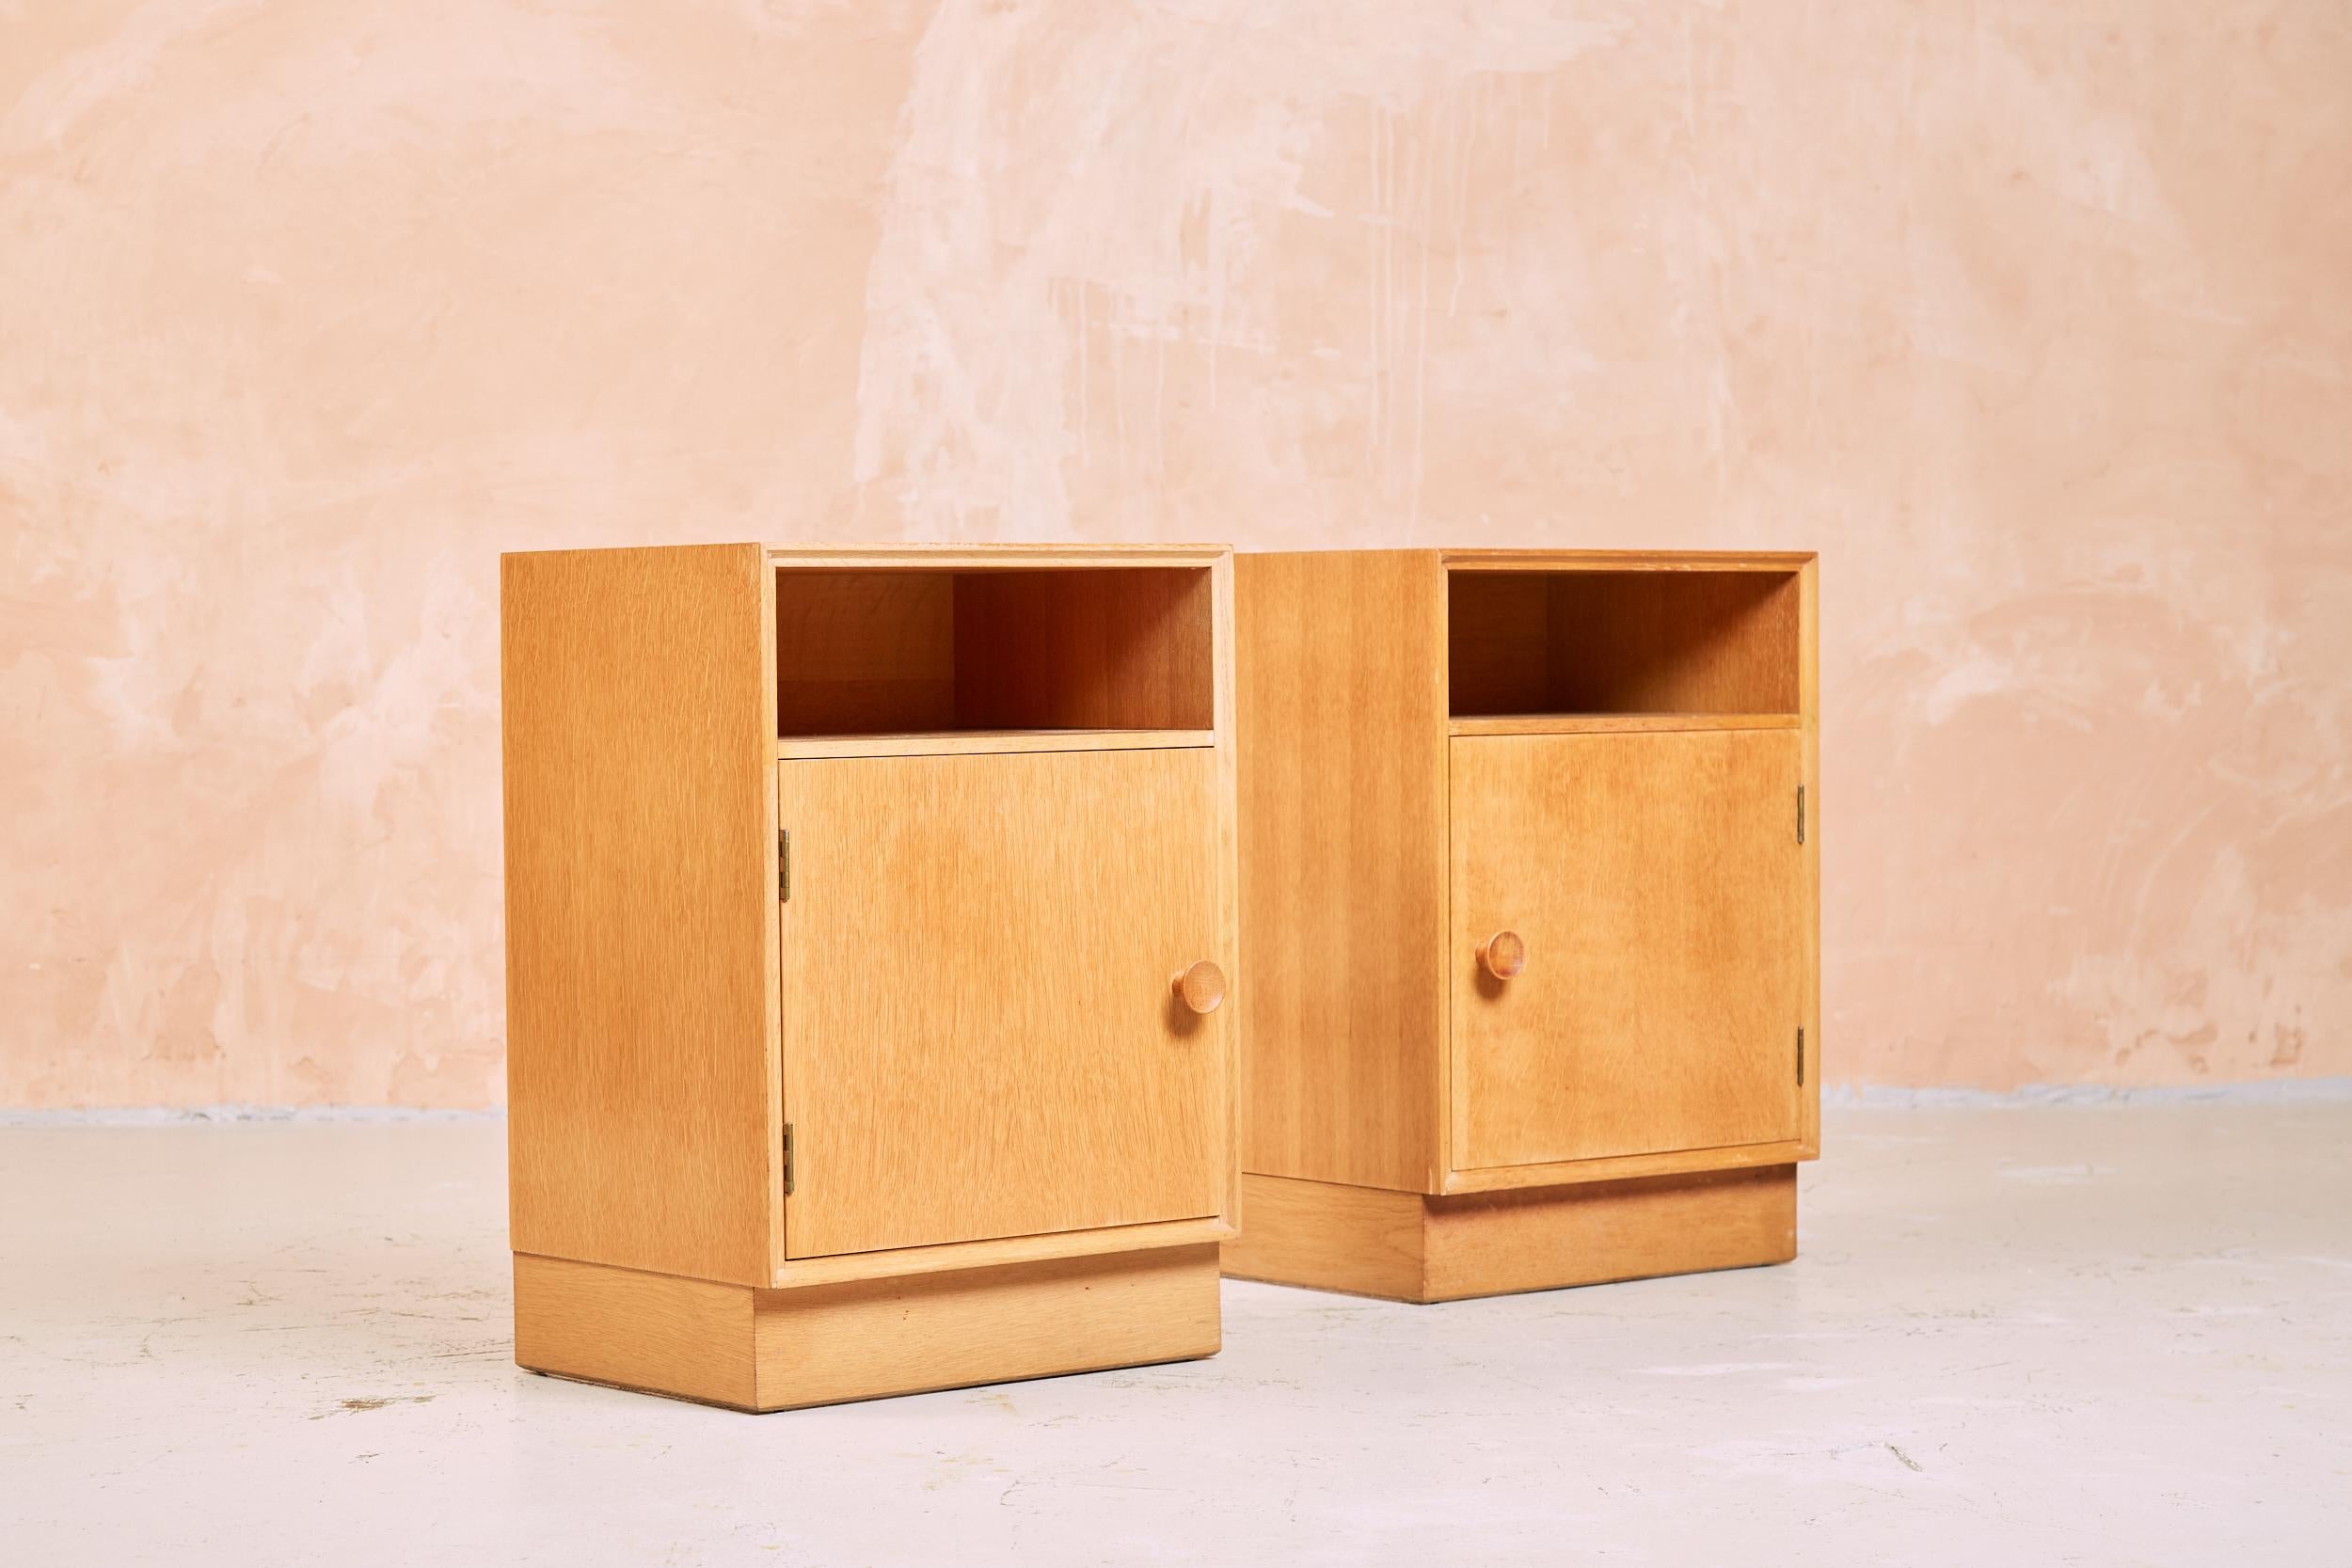 Two oak bedside cabinets by Meredew.
The 'handed' cupboards (hinged on both left and right) have a single fixed shelf inside.
Simple and elegant.